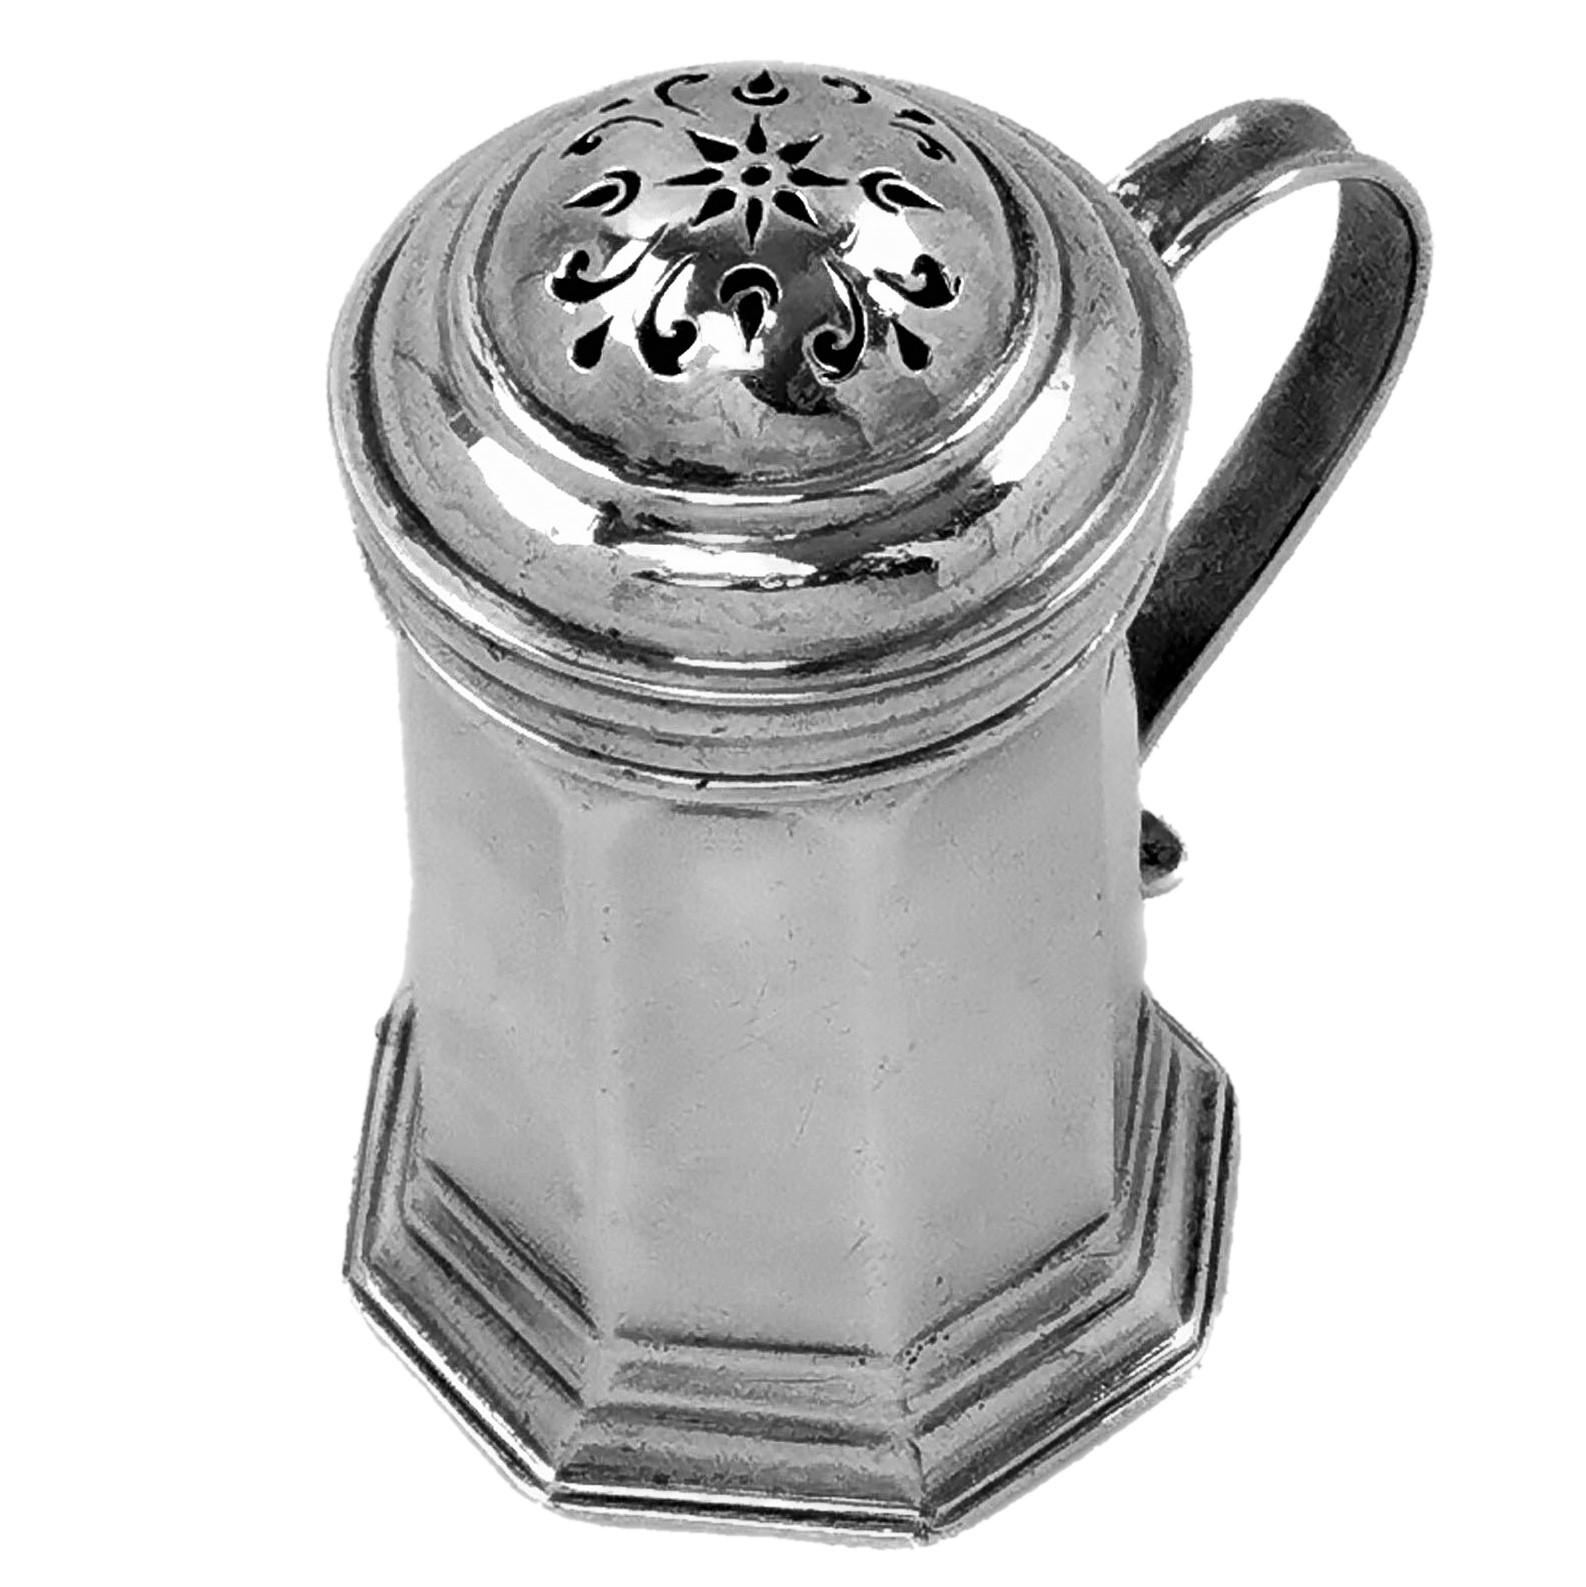 English Antique George I Sterling Silver Pepper Shaker / Caster 1722